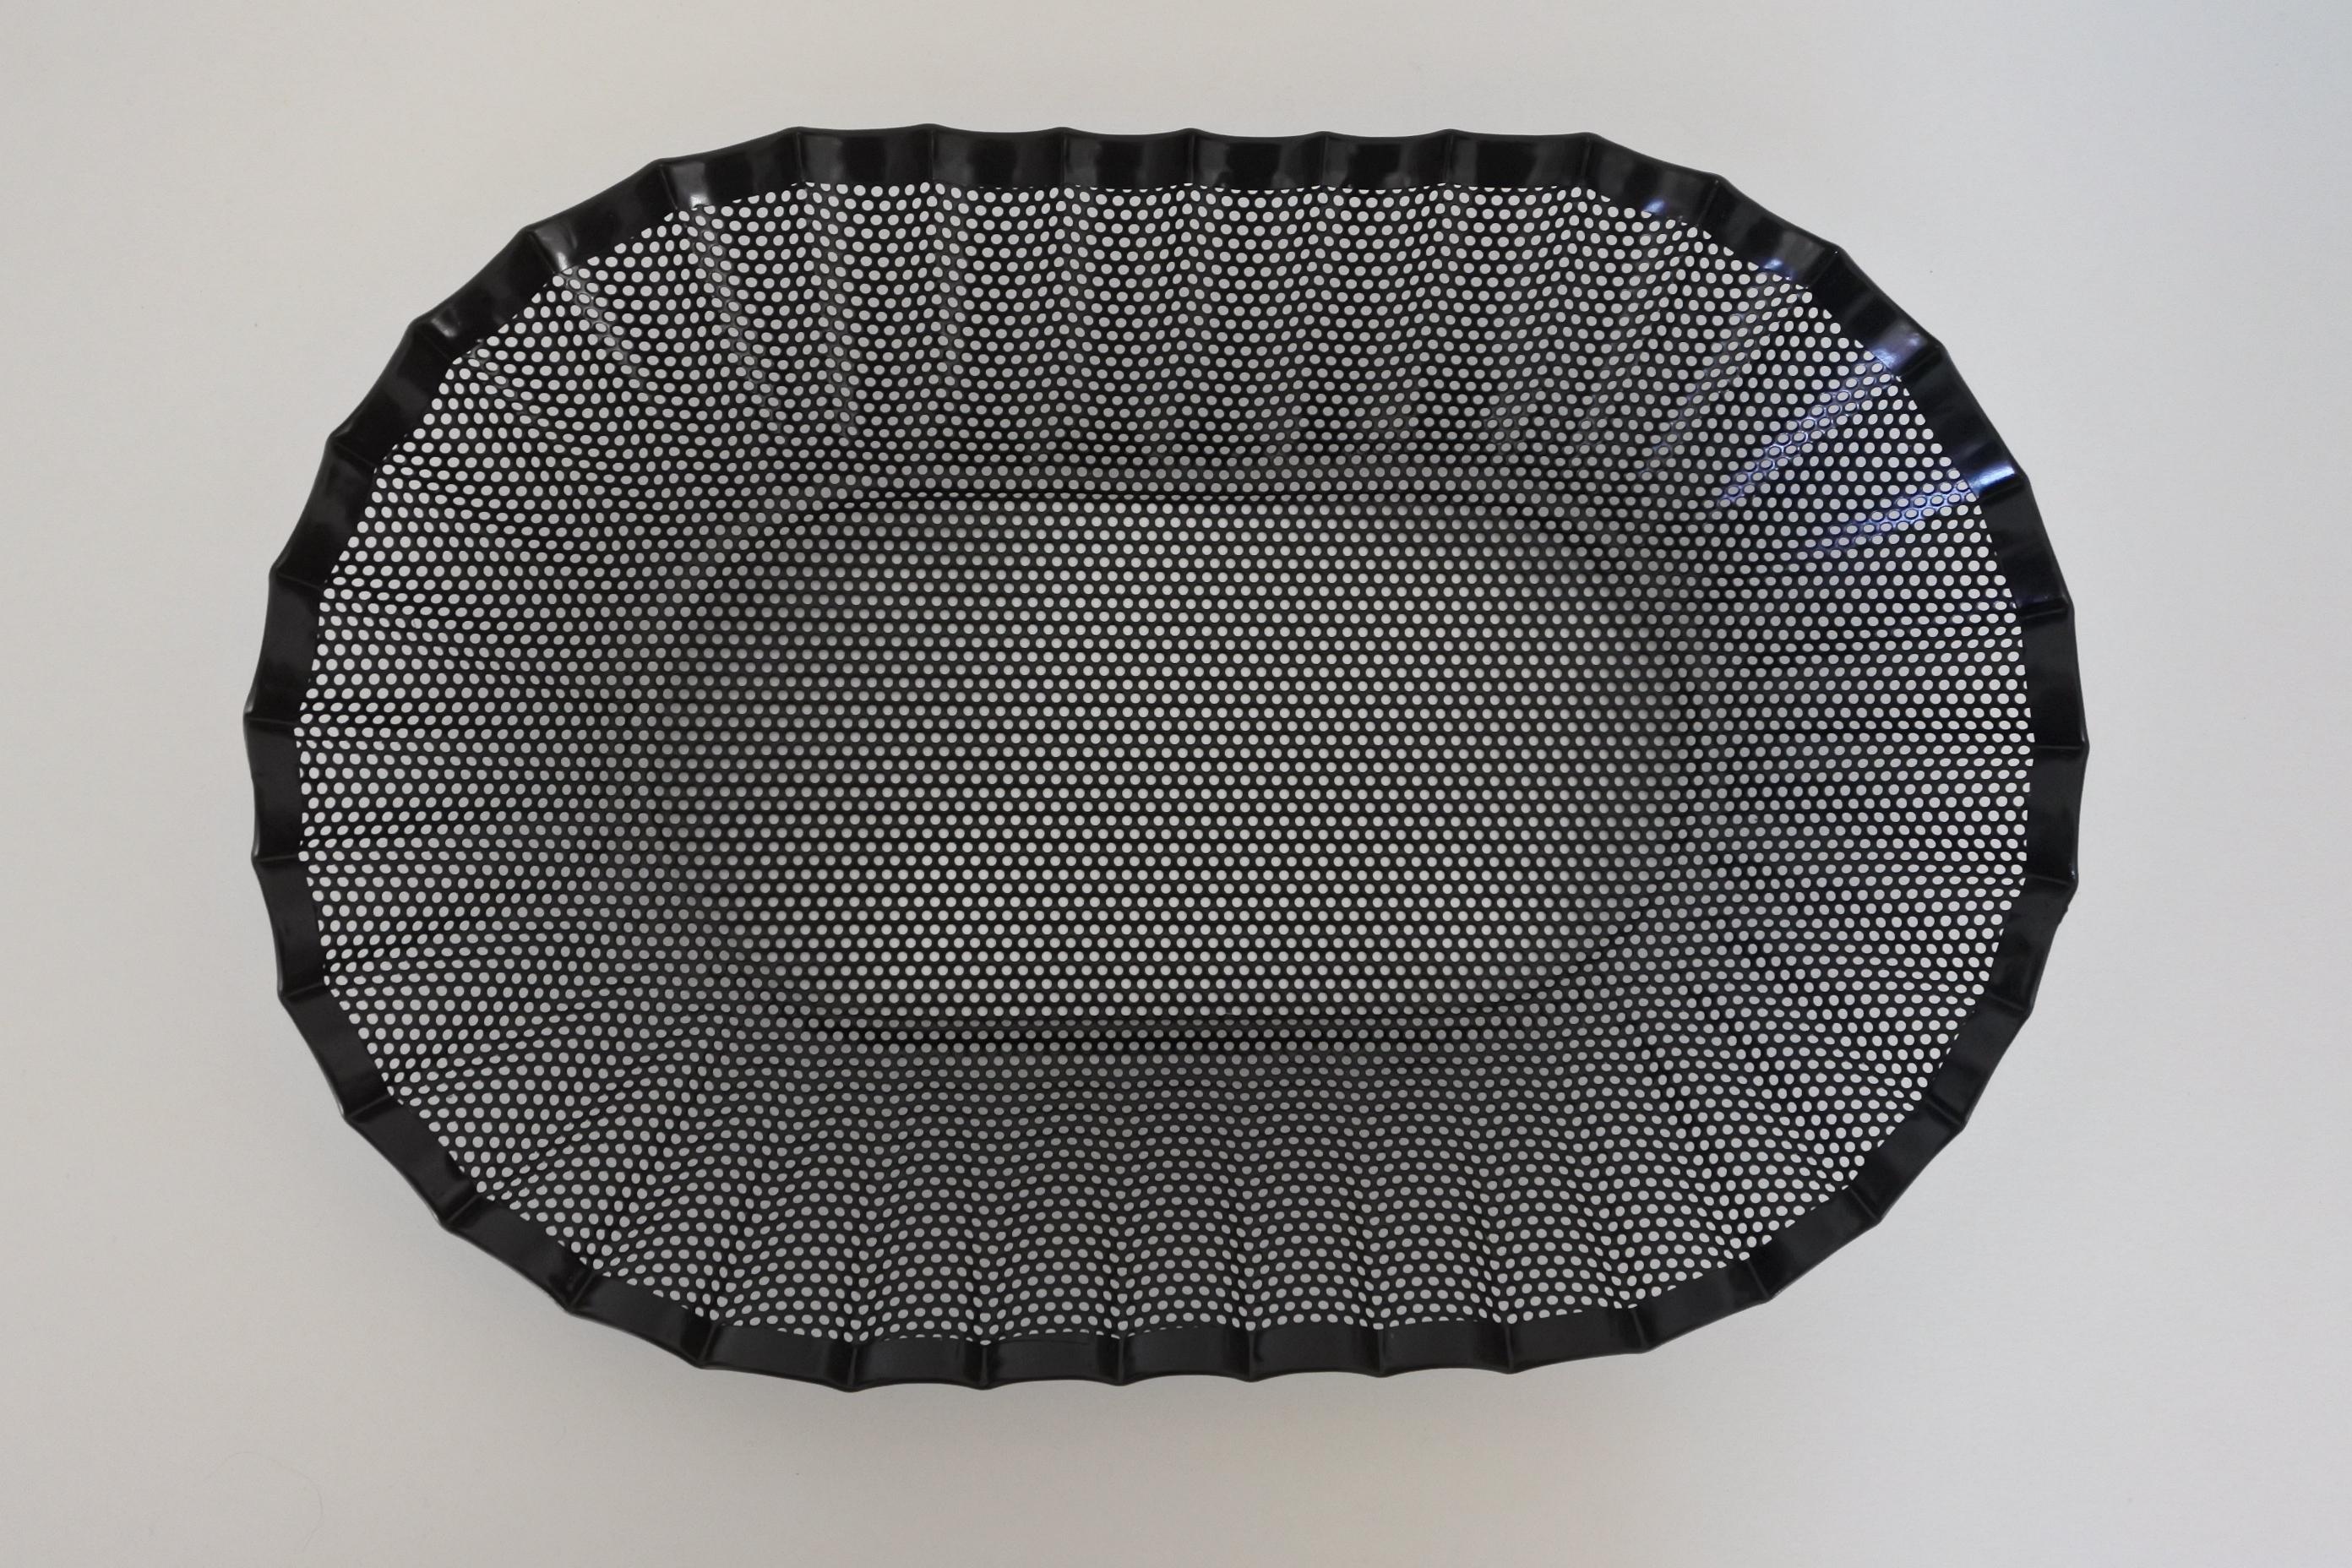 Dish or basket by renowned French designer Mathieu Mategot.
Perforated black lacquered metal (Rigitulle).
Made in France in the 1950s.

Literature: 